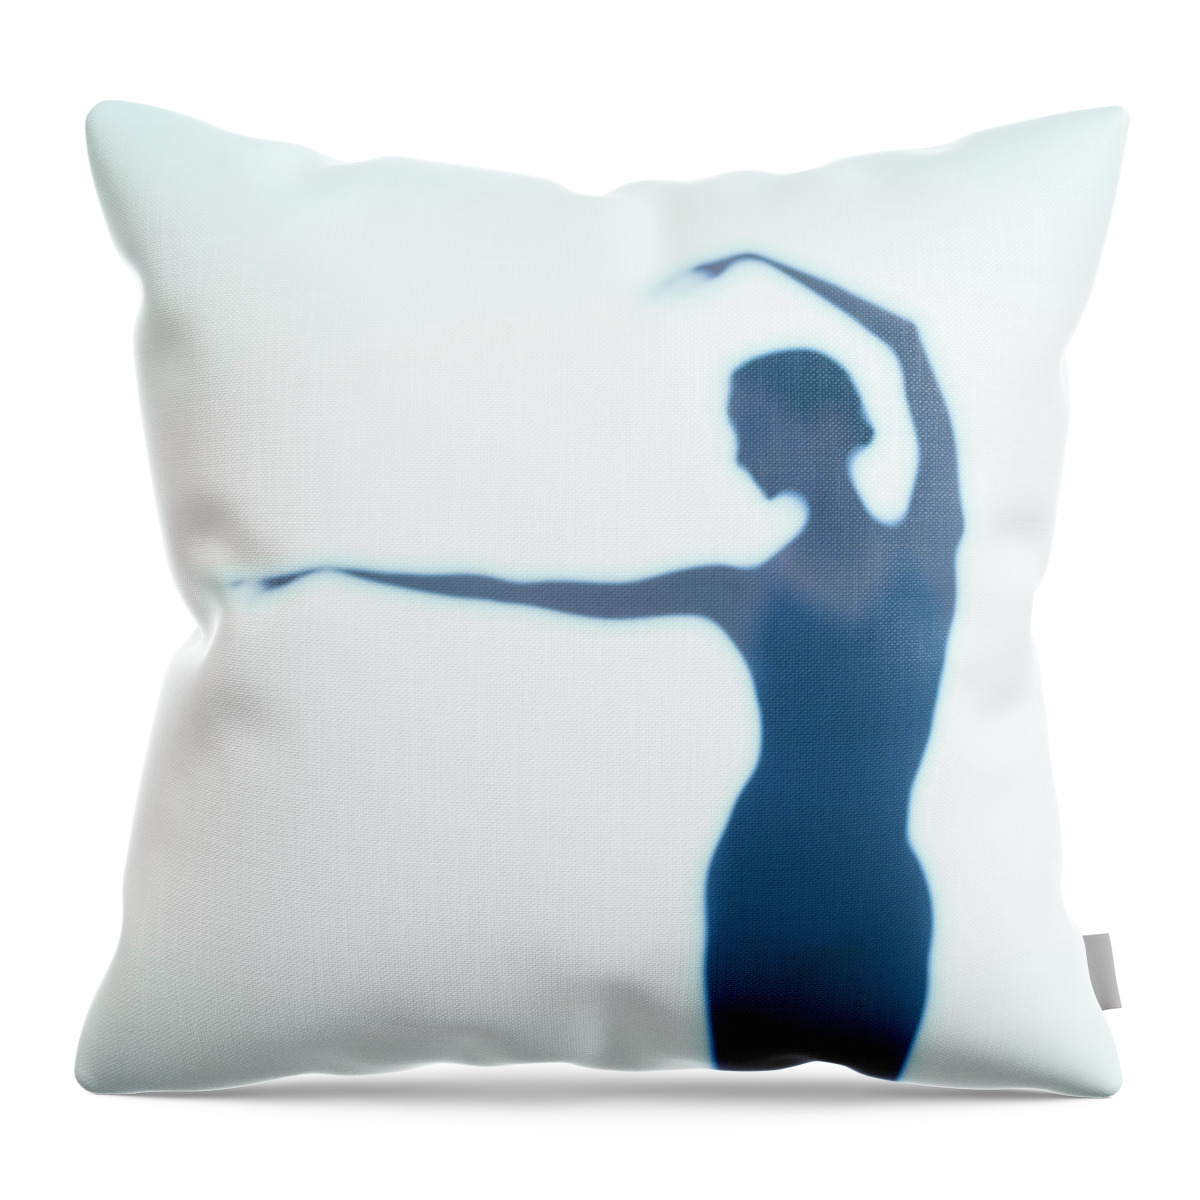 Ballet Dancer Throw Pillow featuring the photograph Ballerina Dancing Silhouette by George Doyle